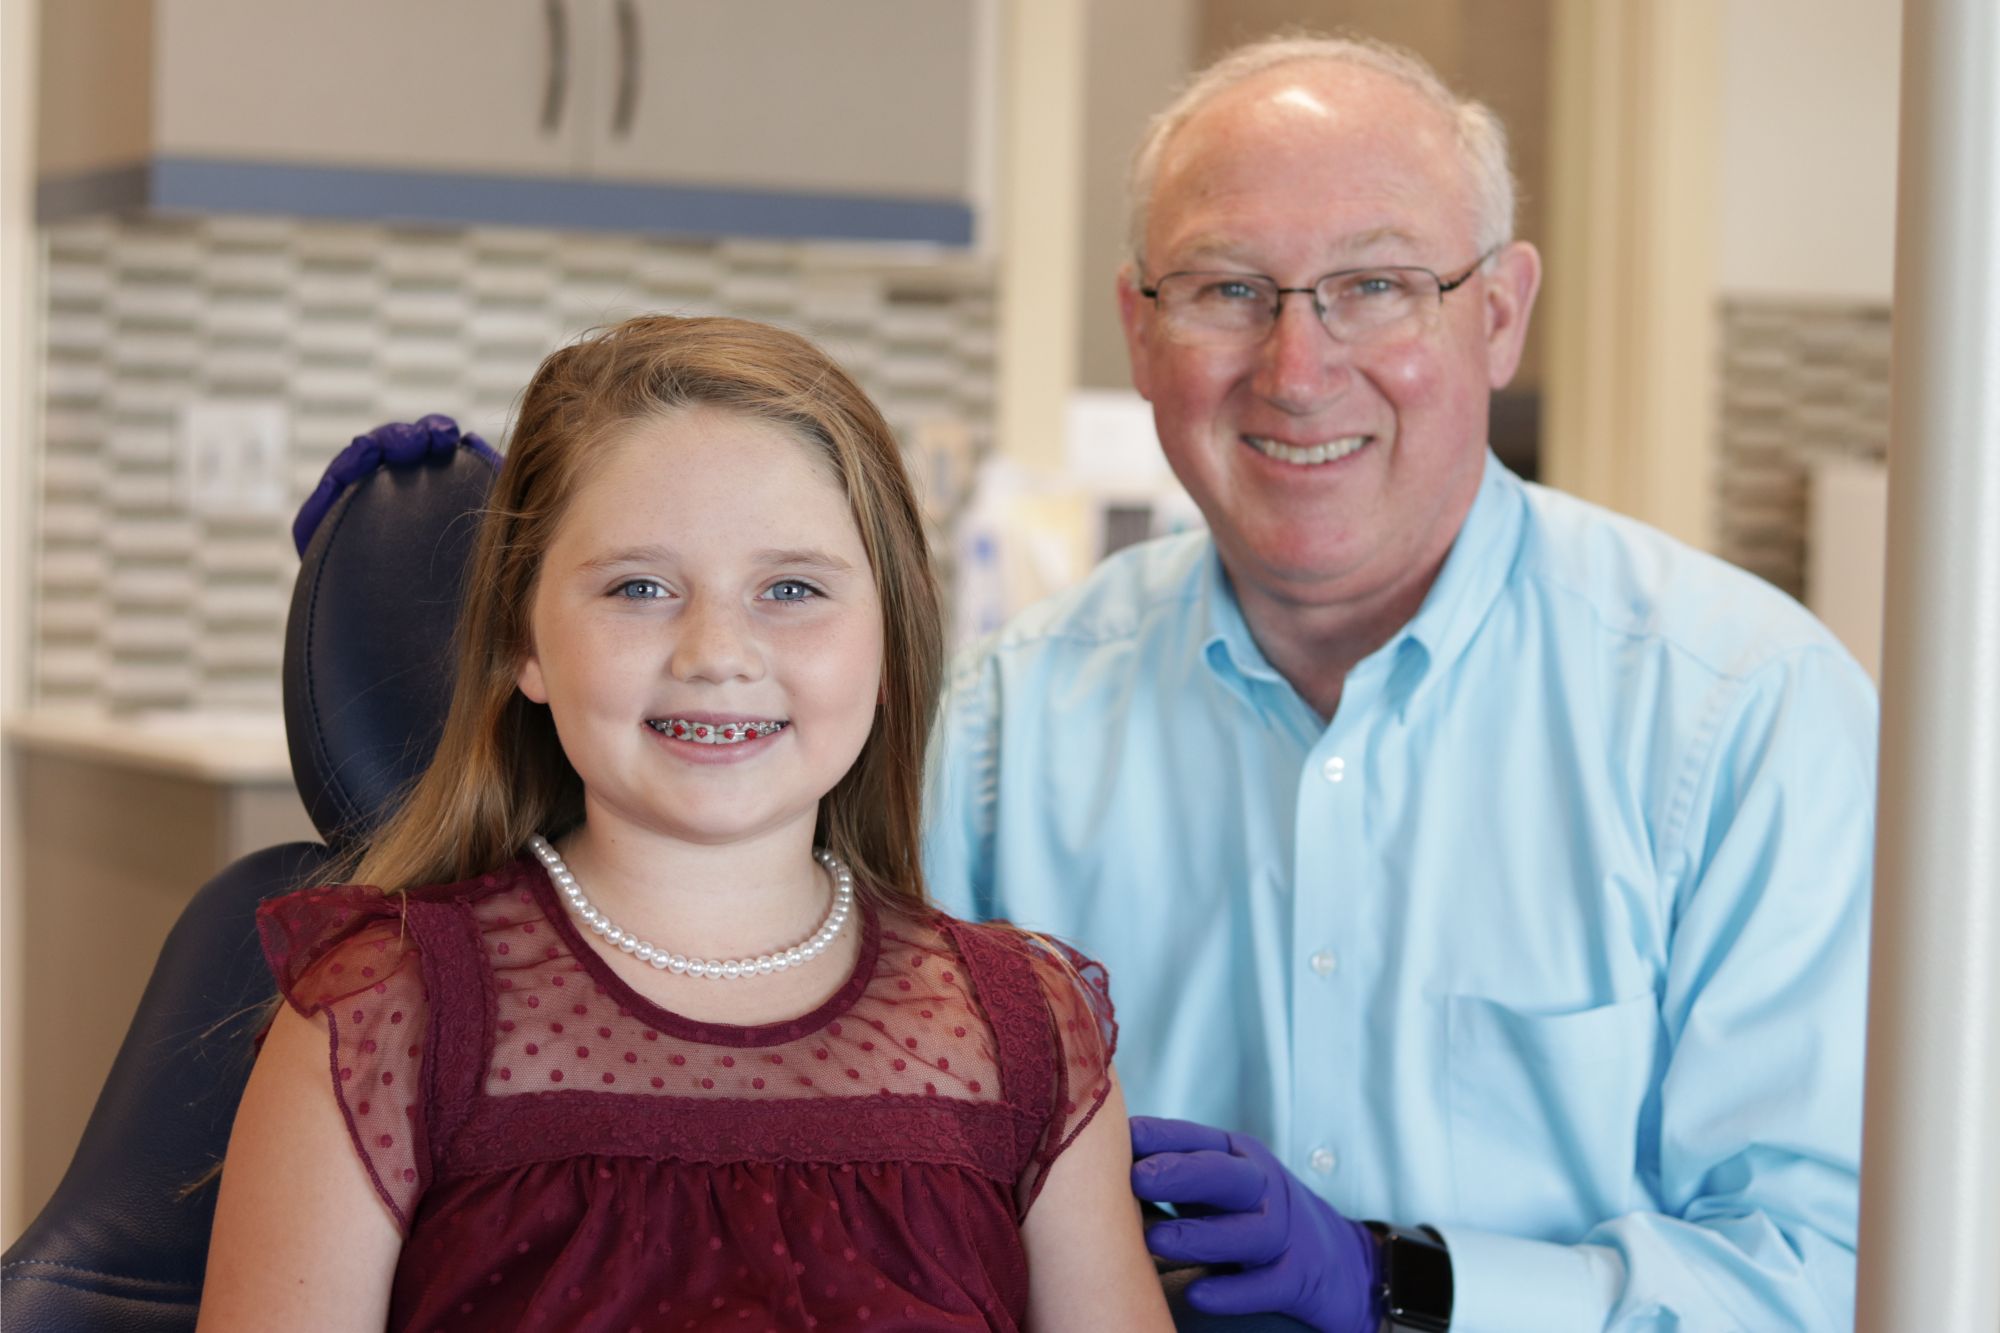 Dr. John Benton smiling with a young patient